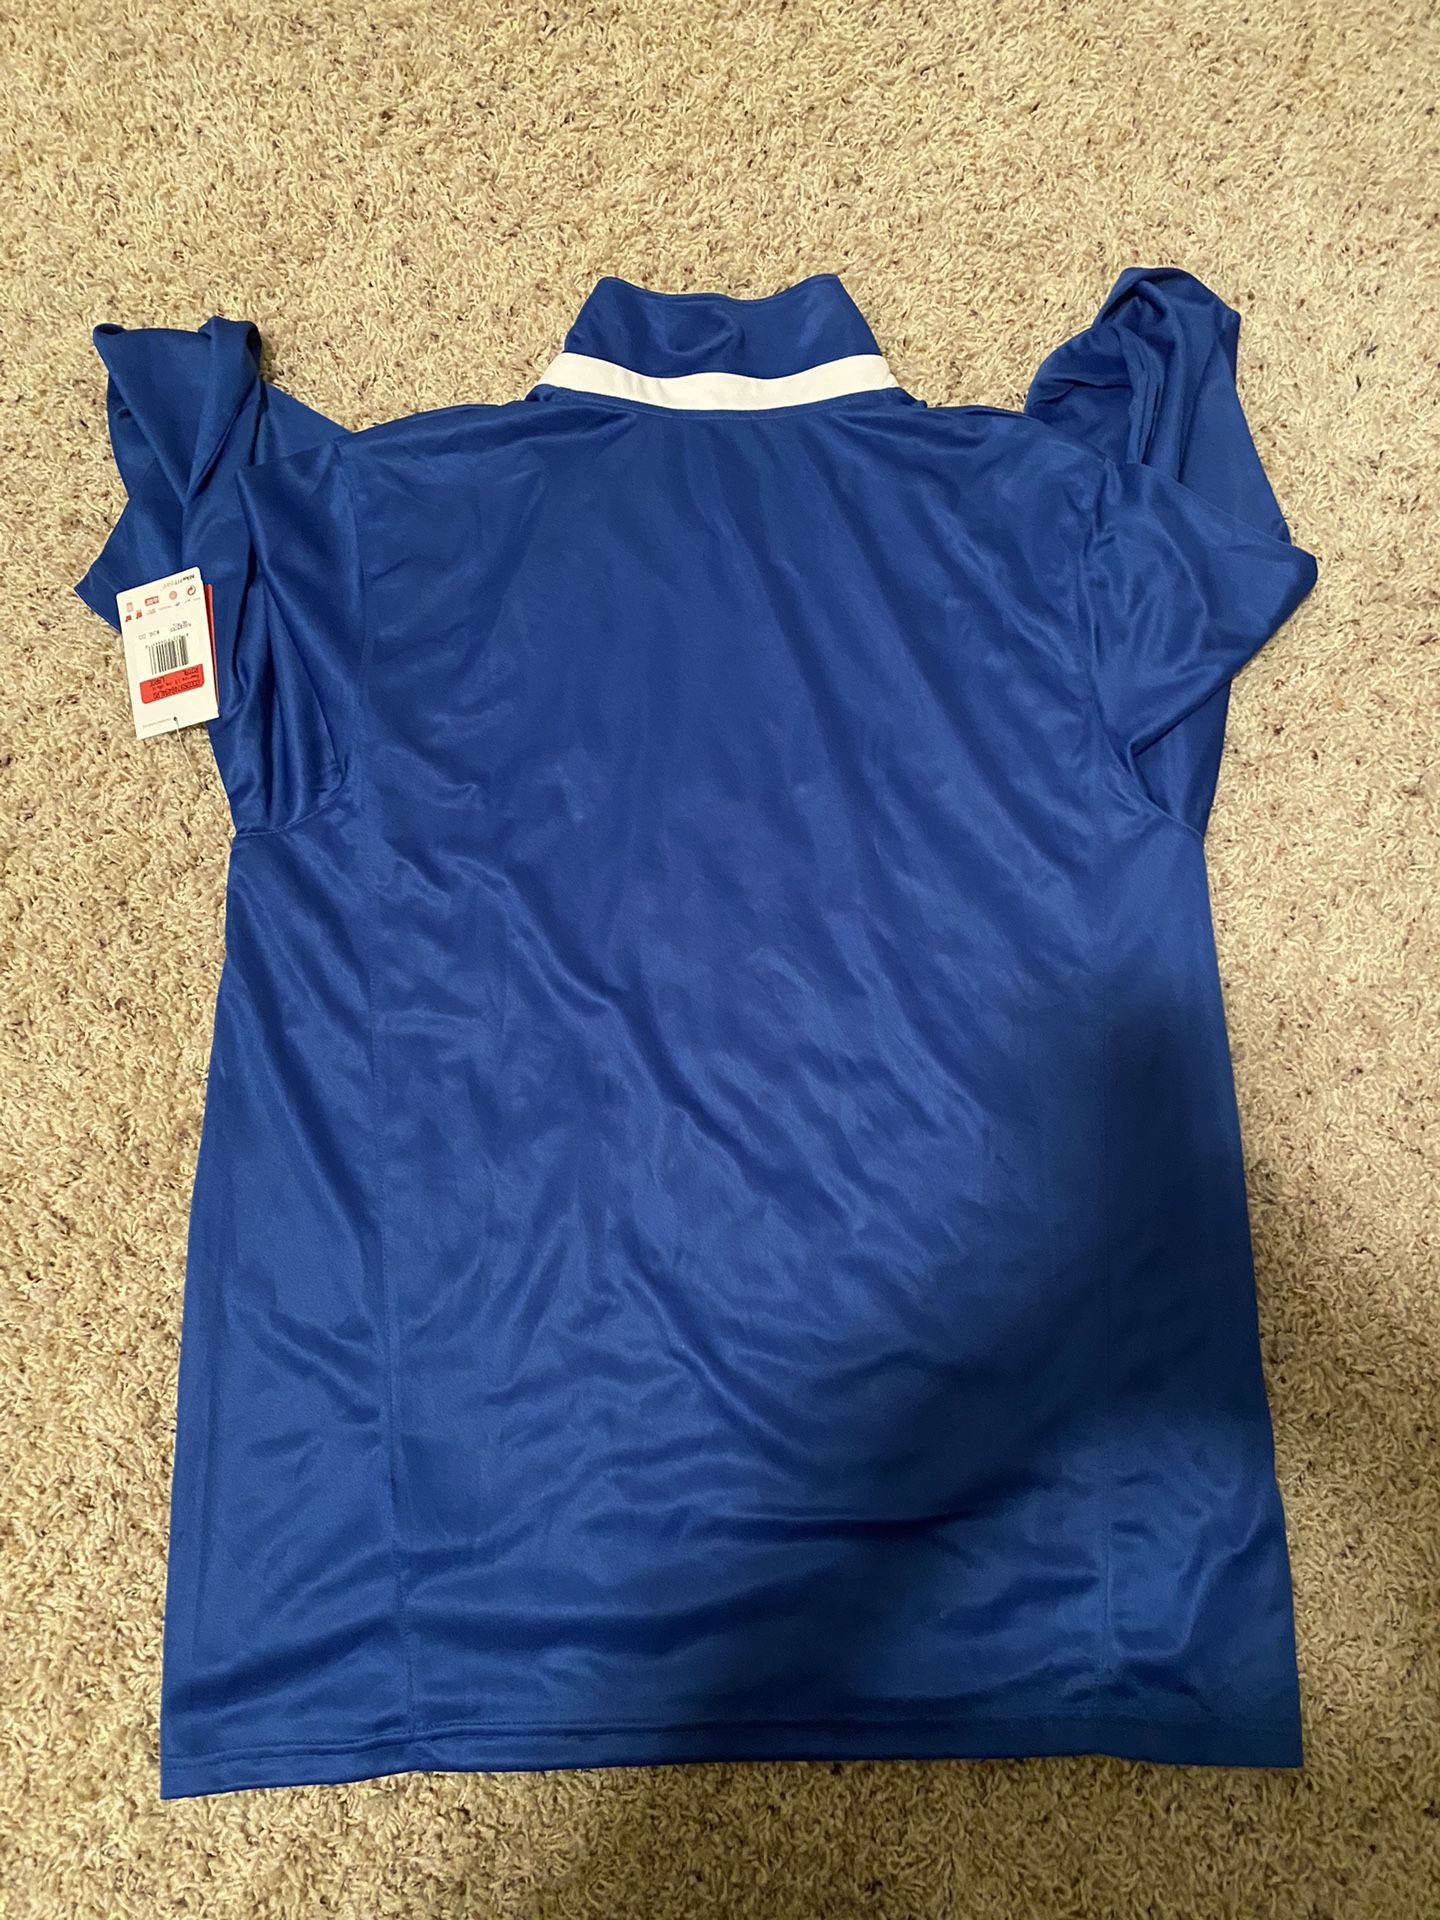 USA USMNT L 1996 West MLS All Star Game Jersey Vintage Soccer Fast Ship  Rare US for Sale in Westmont, IL - OfferUp